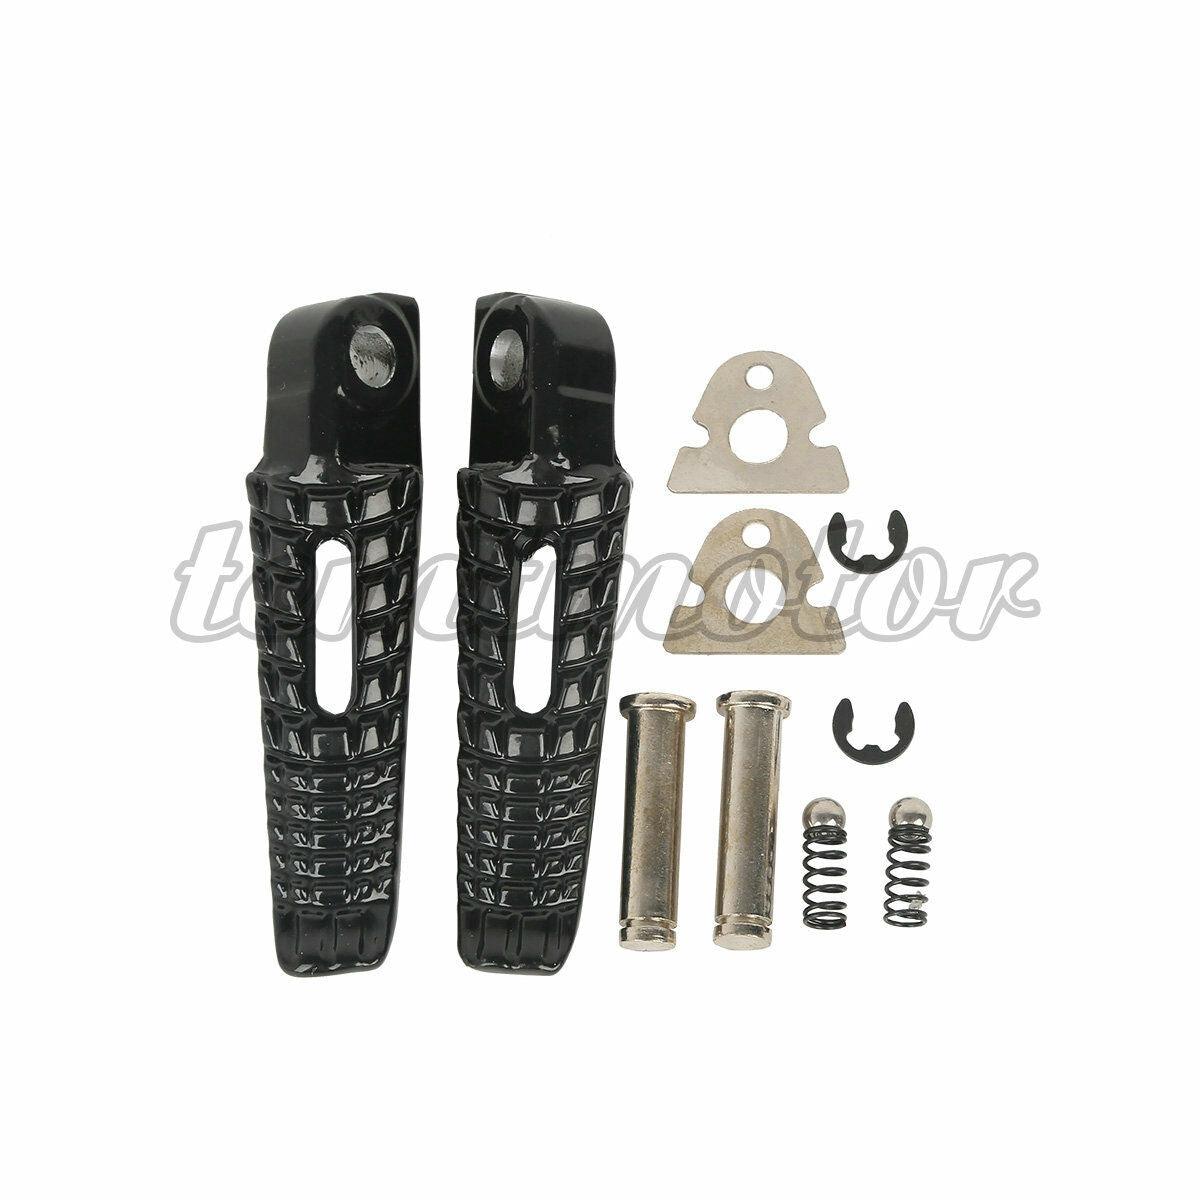 Aluminum Rear Black Passenger Foot Pegs Footrests Fit For Suzuki GSXR1000 05-20 - Moto Life Products